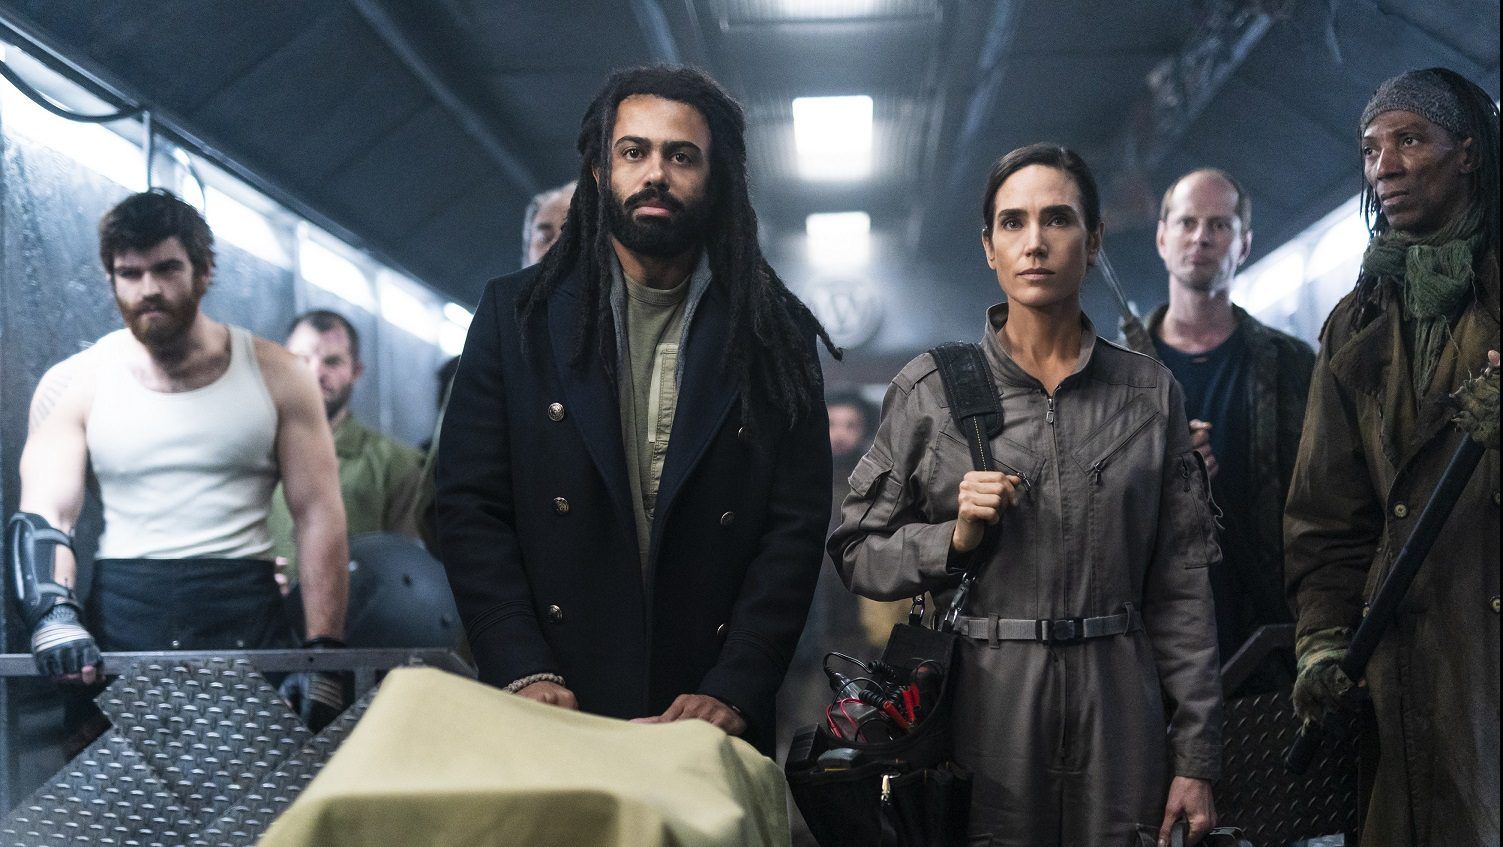 Exclusive: Snowpiercer's Daveed Diggs Talks About Upcoming 'Wild